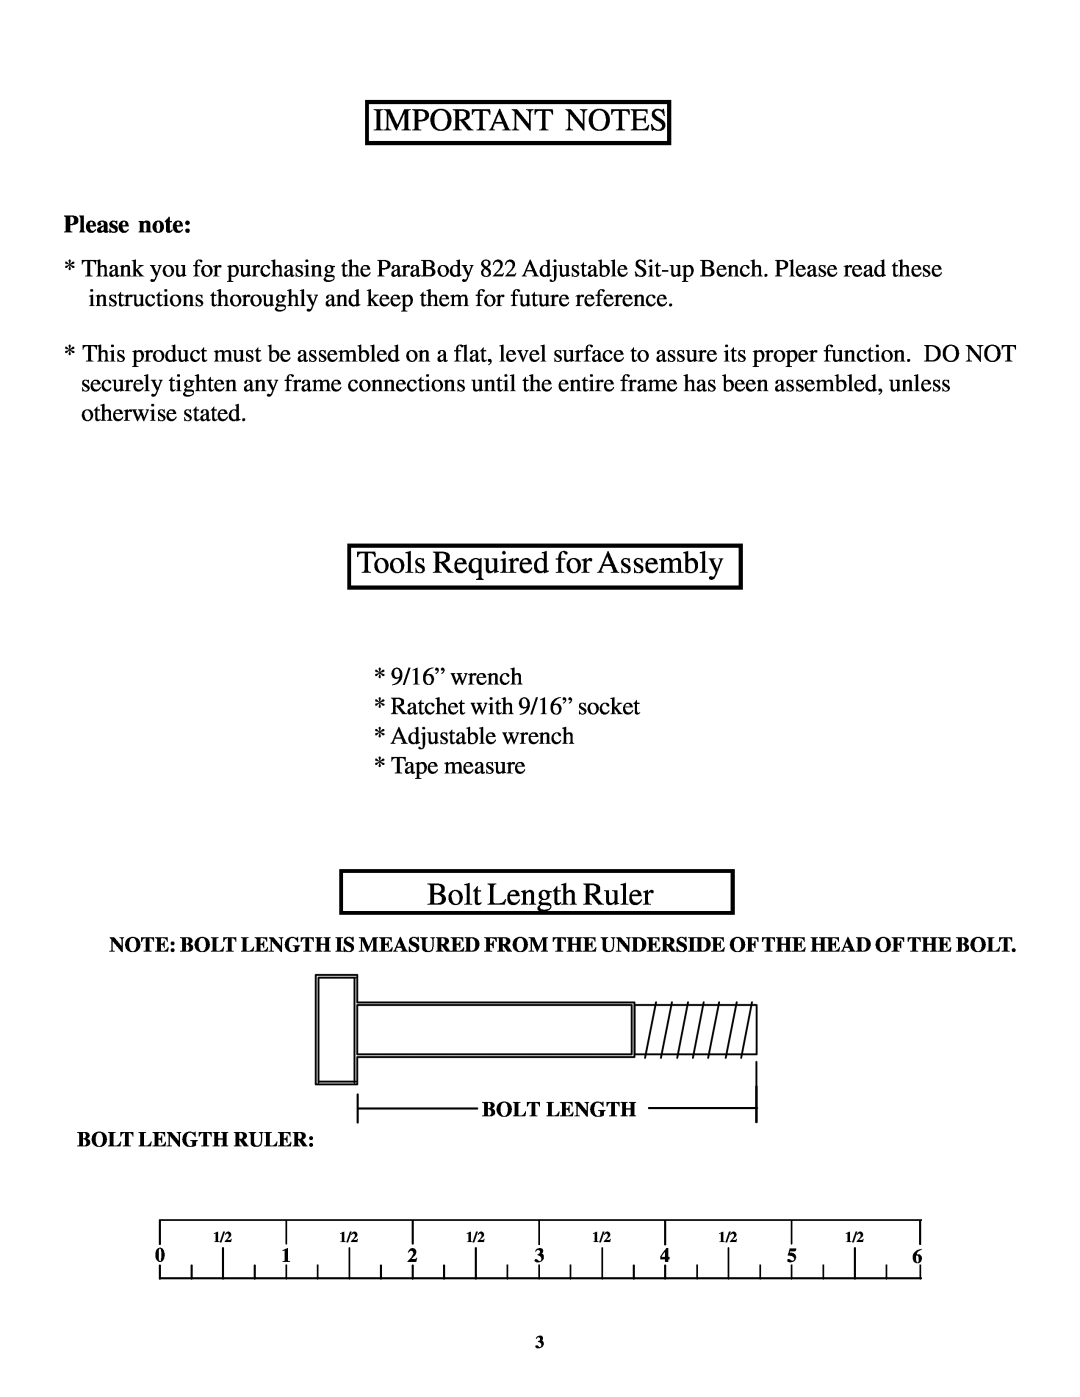 ParaBody 822 manual Important Notes, Tools Required for Assembly, Bolt Length Ruler, Please note 